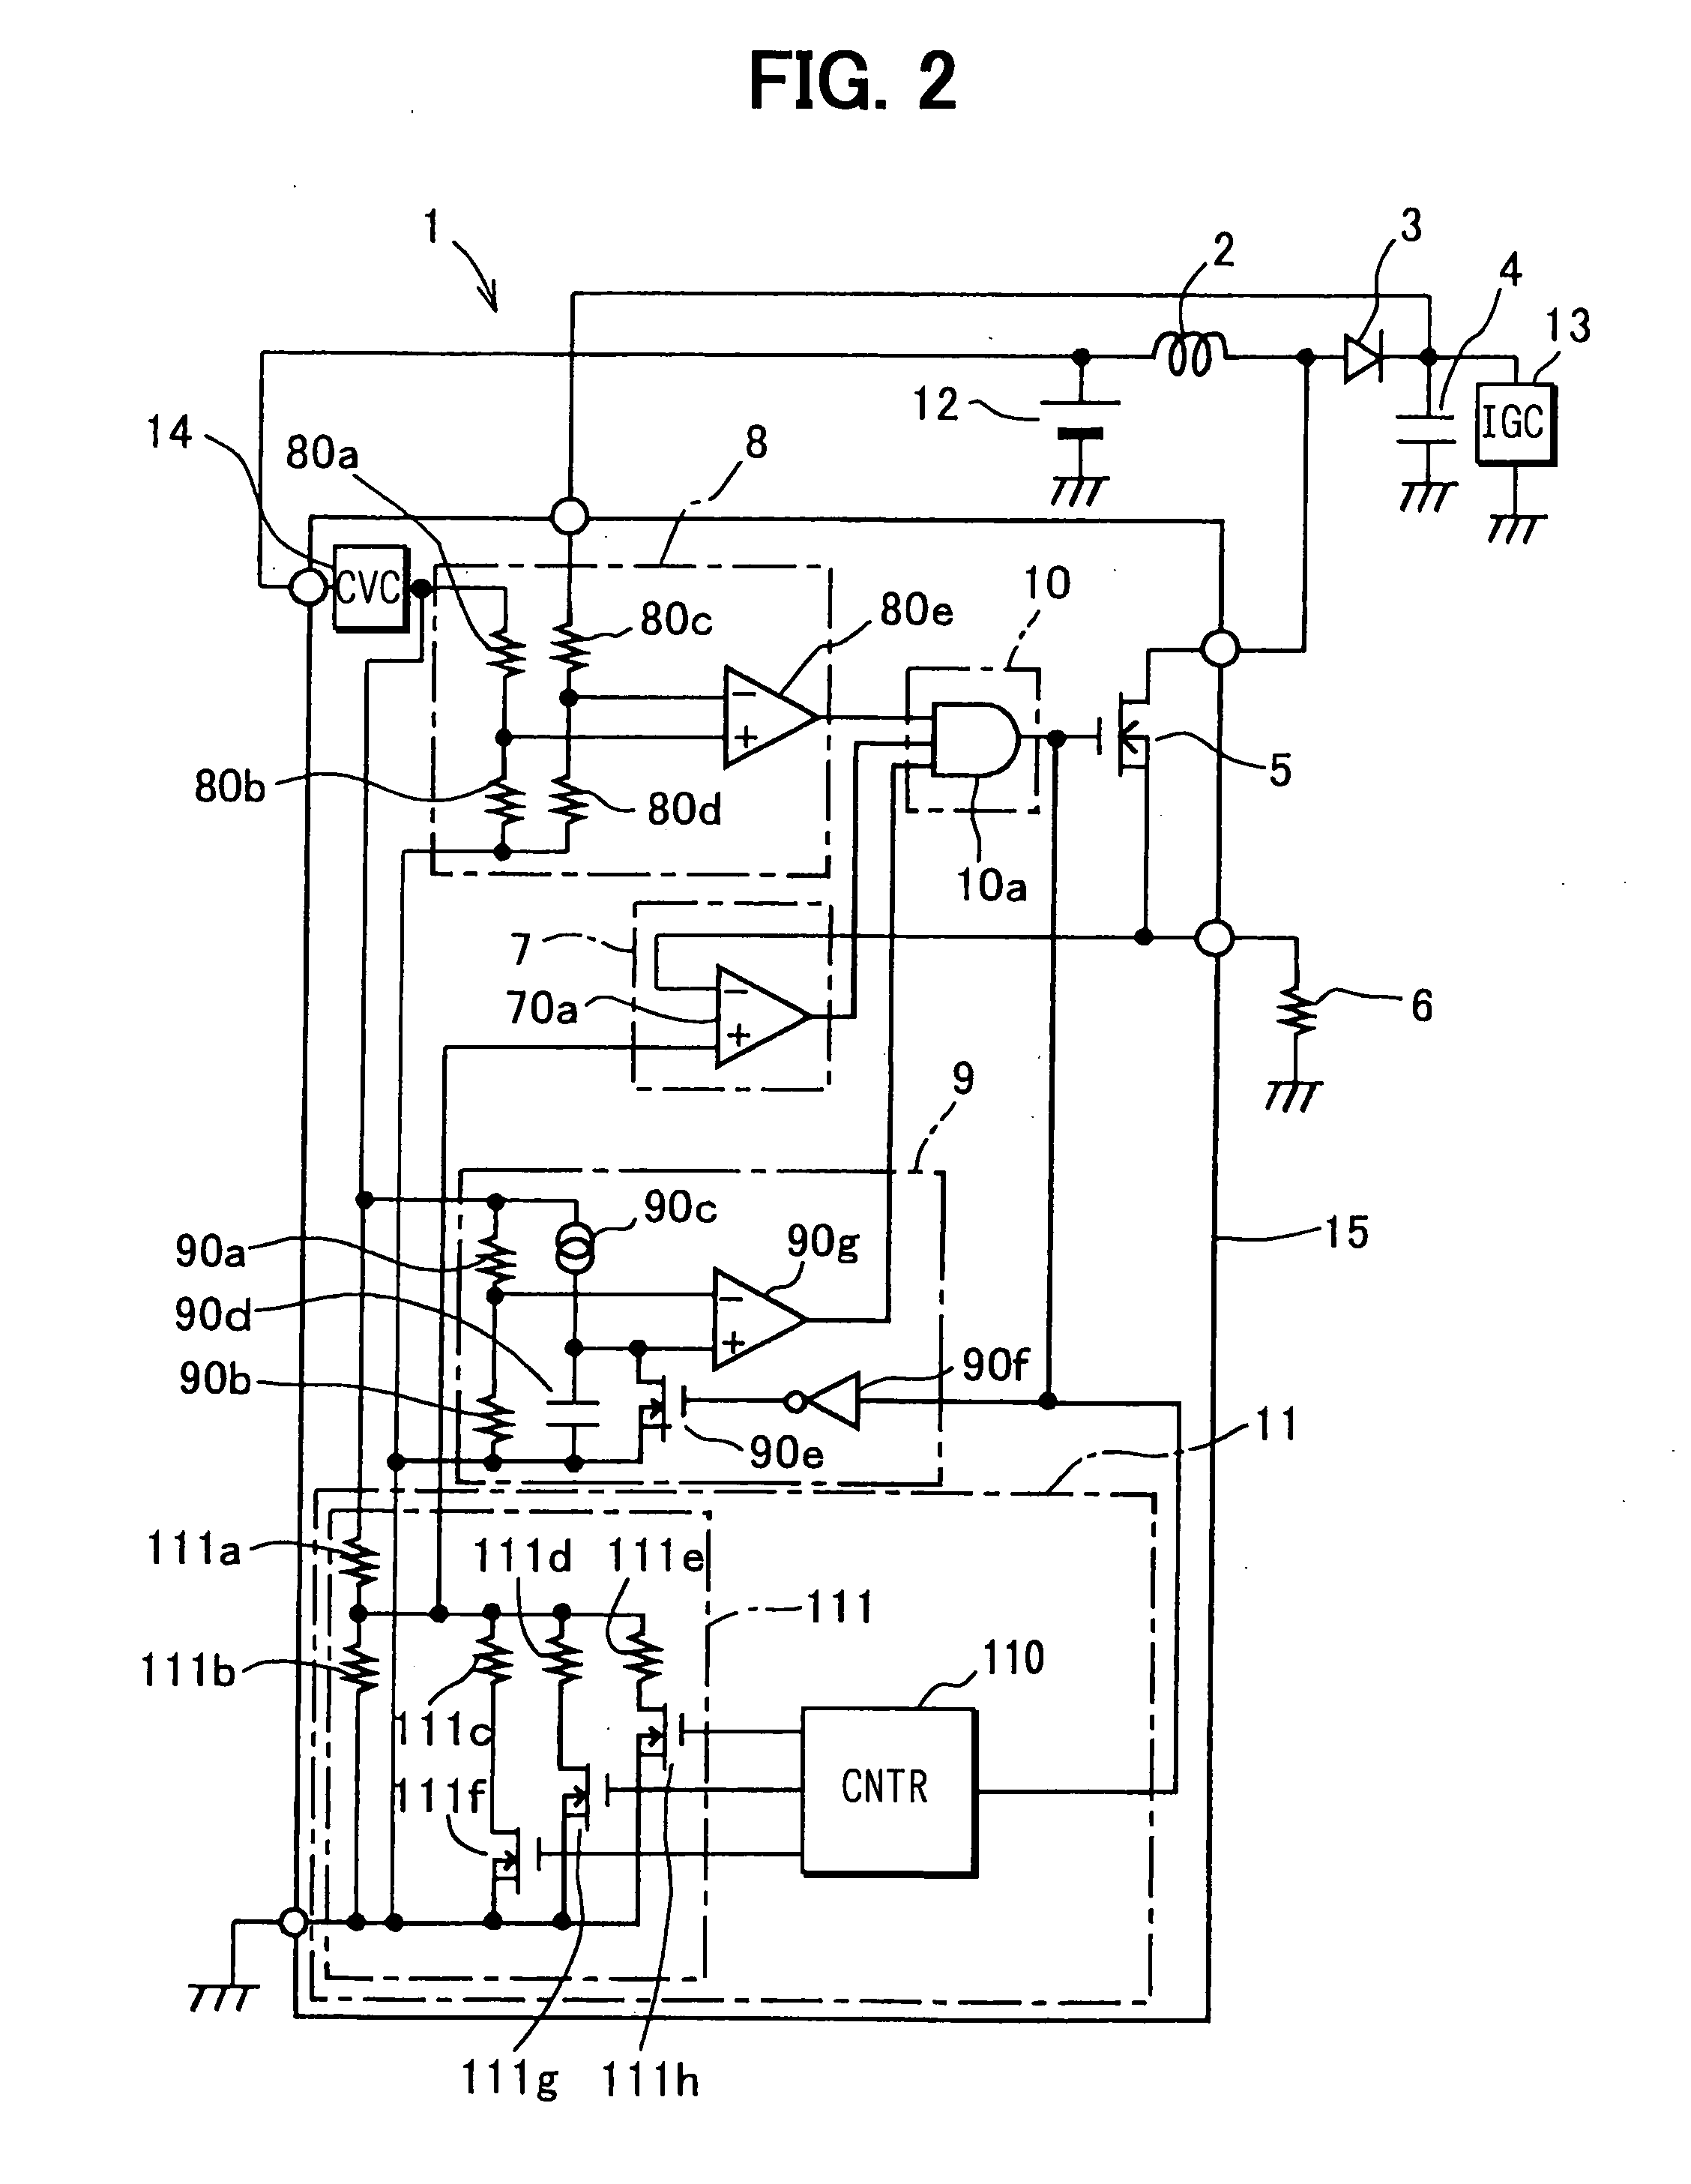 DC-DC converter for boosting input voltage at variable frequency